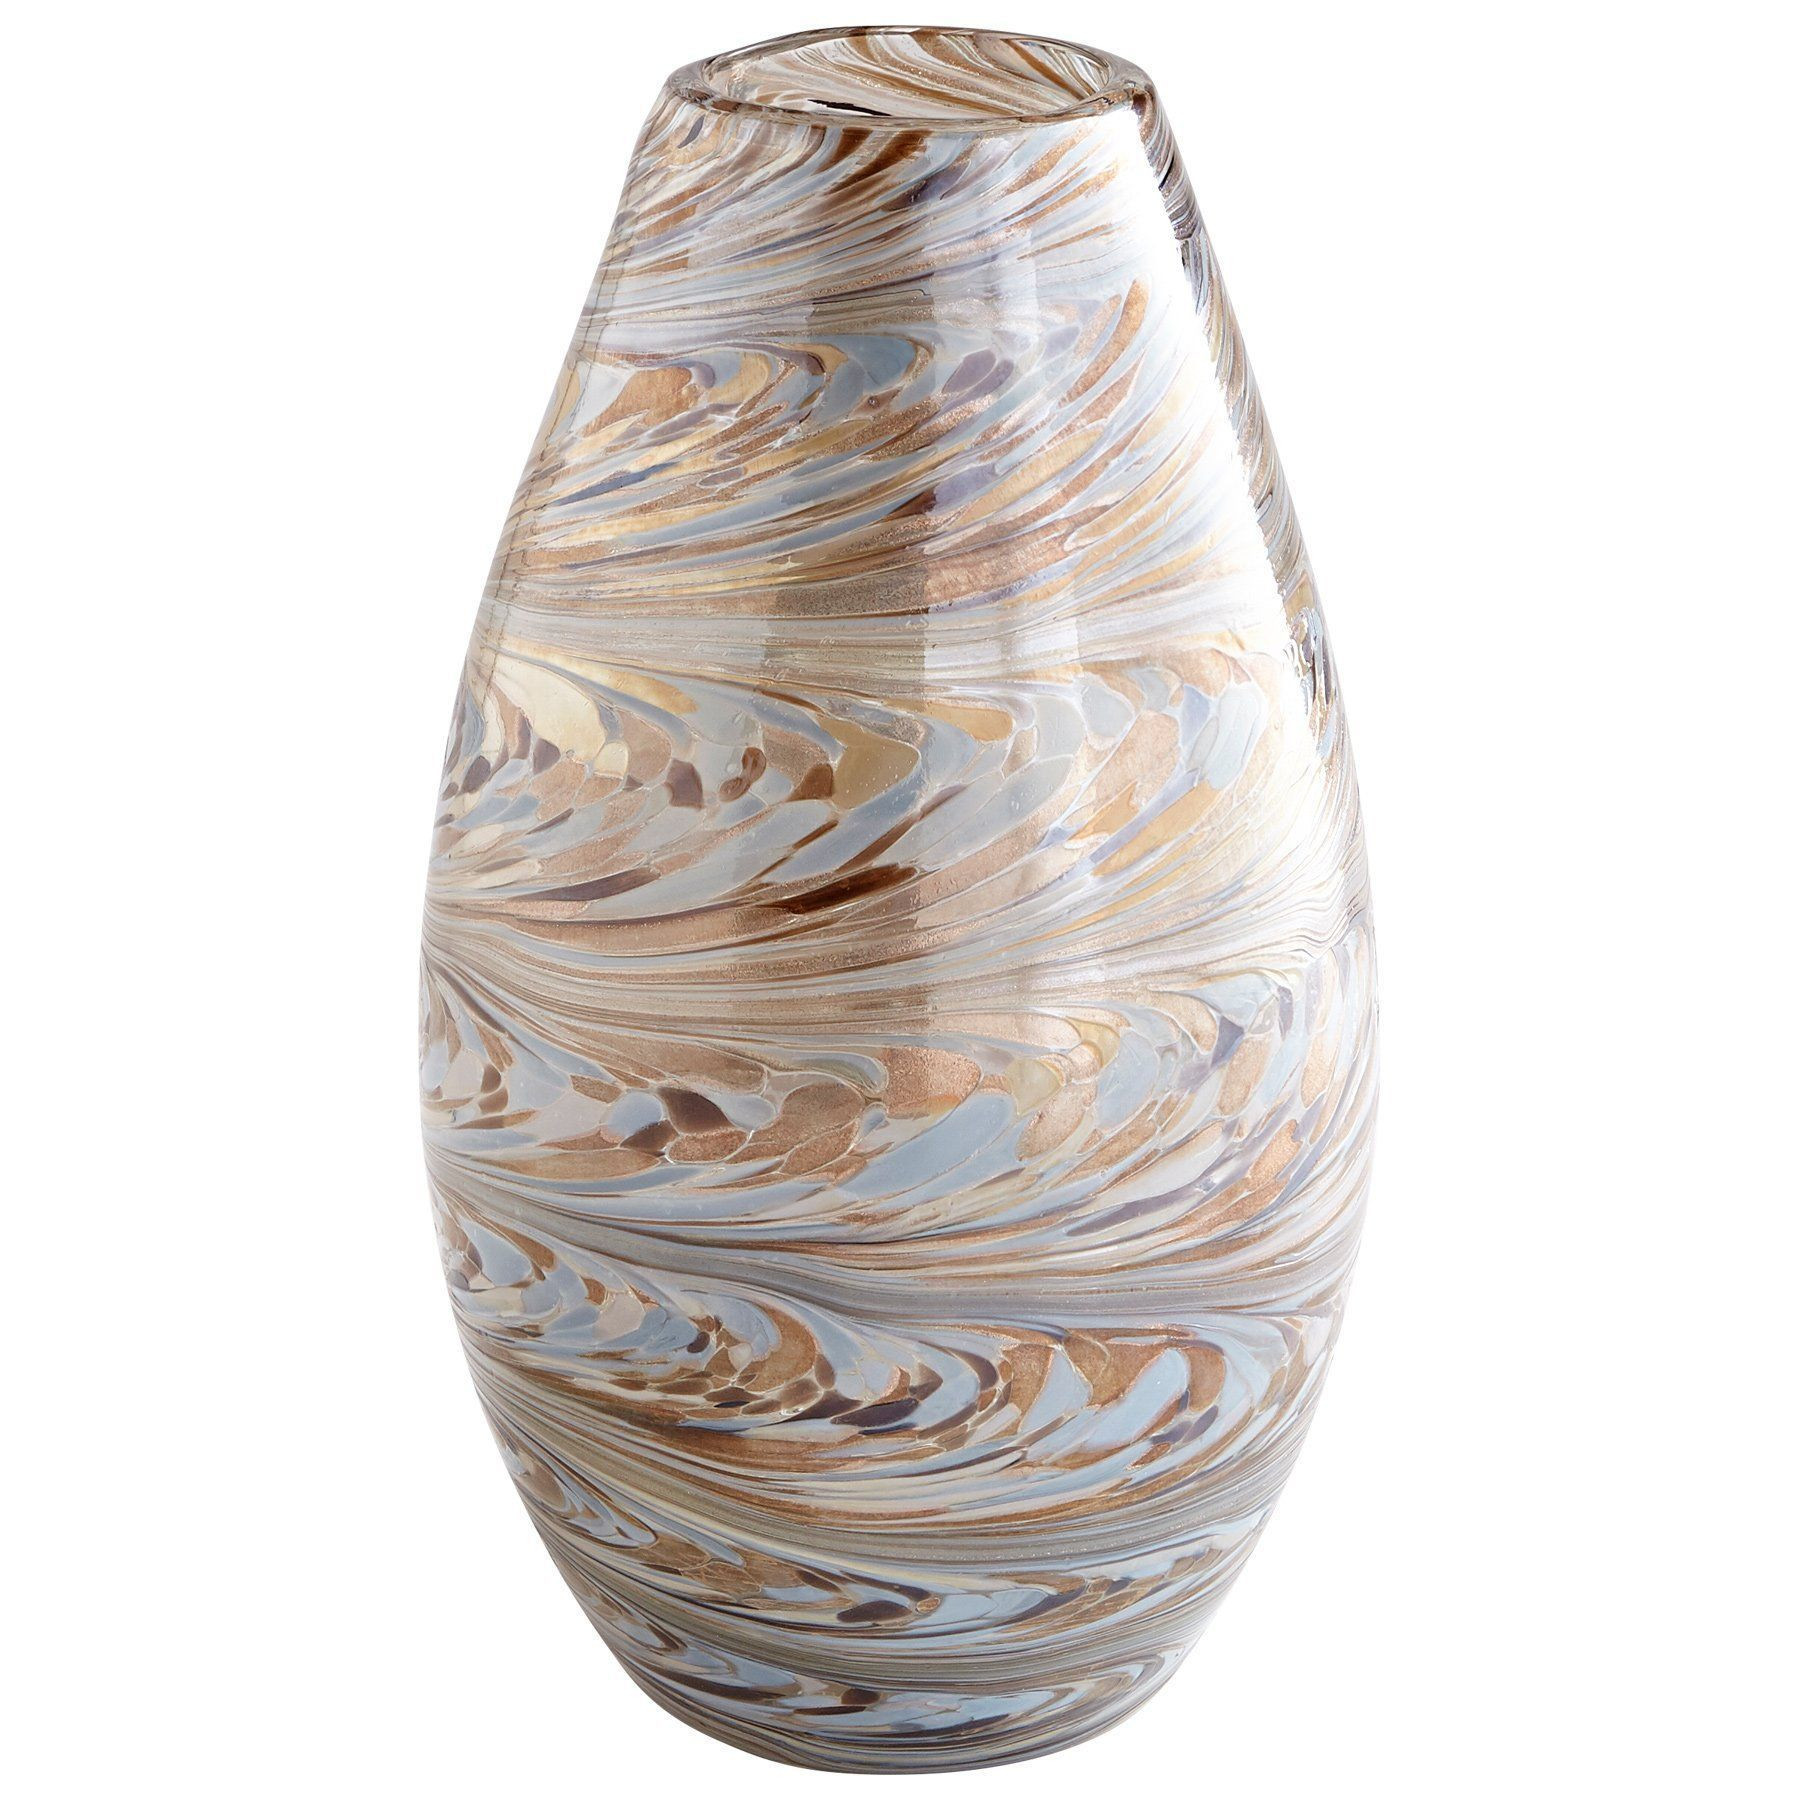 25 Stunning Matte Green Vase 2023 free download matte green vase of 44 gold and silver vase the weekly world with regard to caravelas small gold silver metallic sand swirl art glass vase by